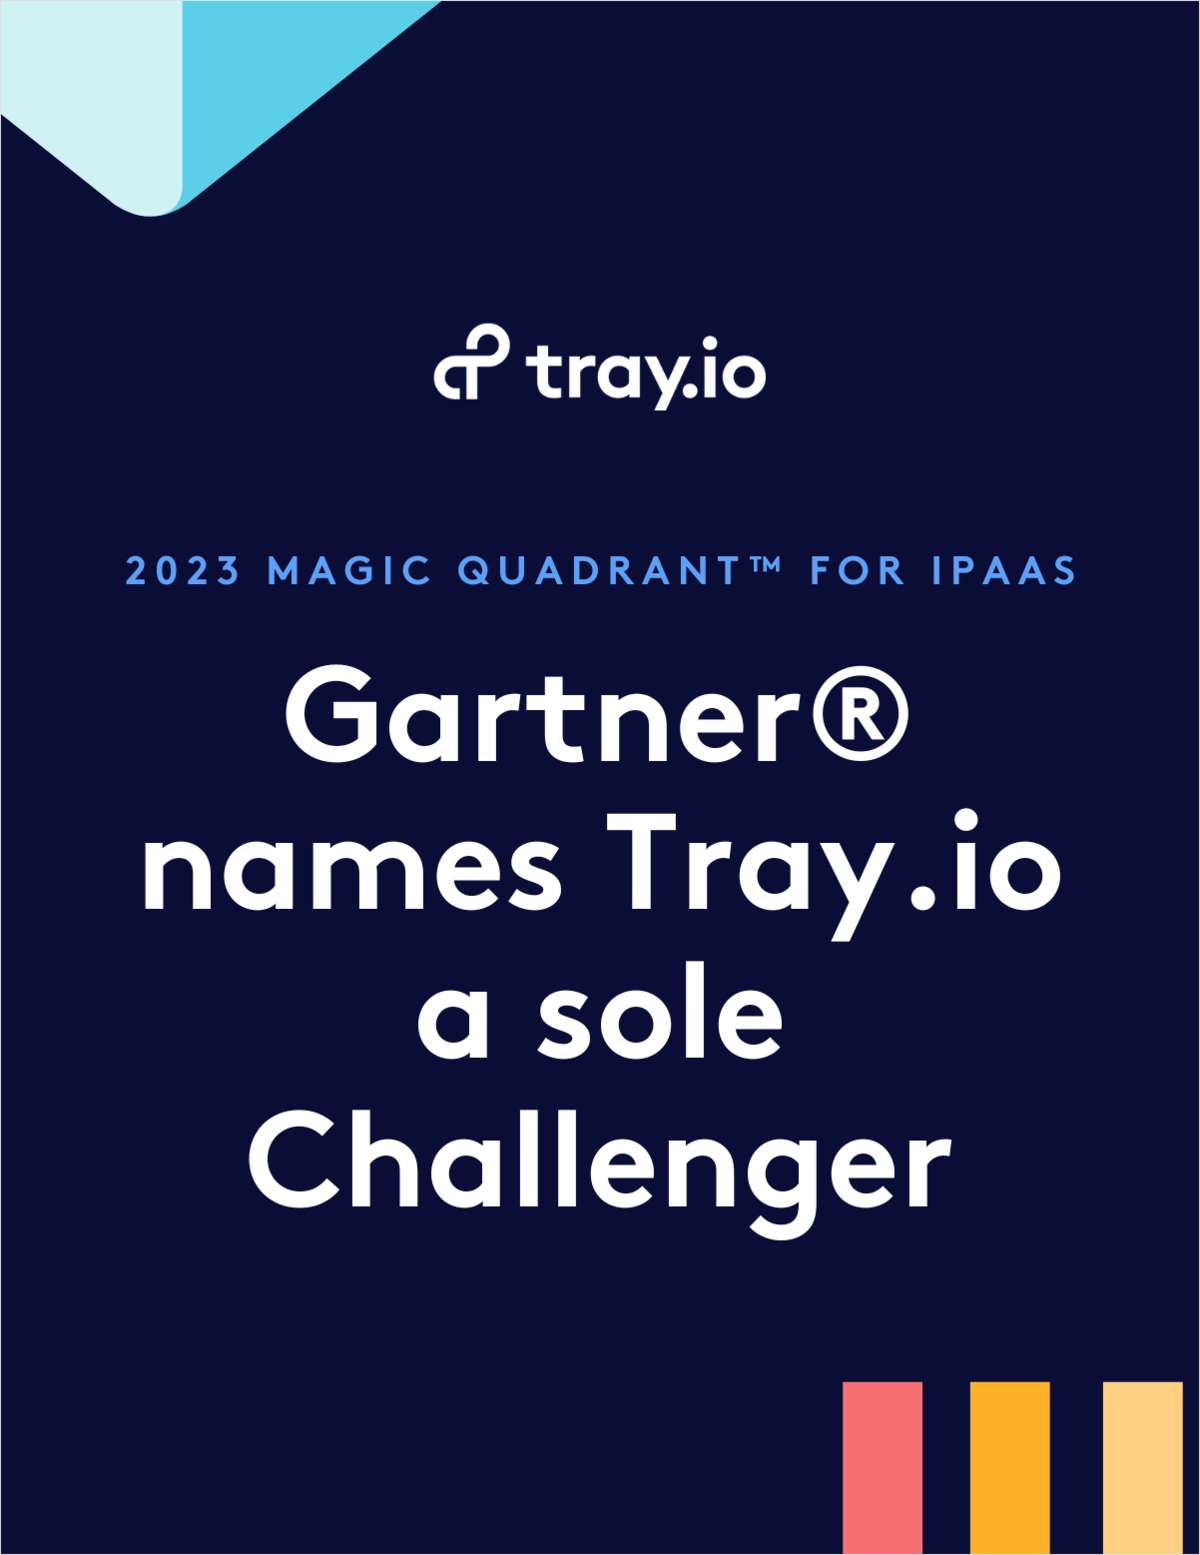 Tray.io named a sole challenger in the 2023 Gartner® Magic Quadrant™ for iPaaS